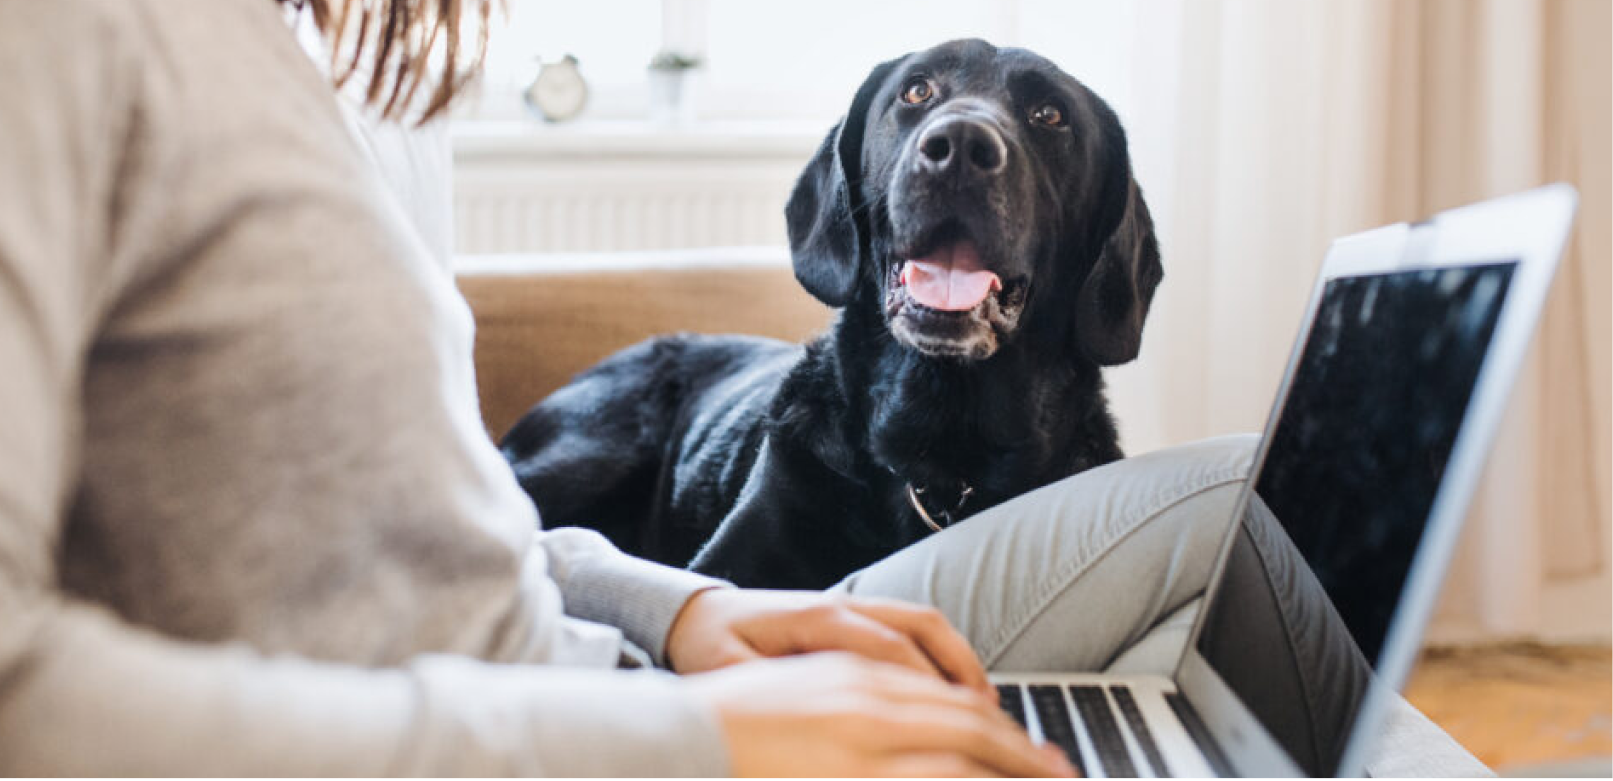 Pet Financing: What Are the Pros & Cons?